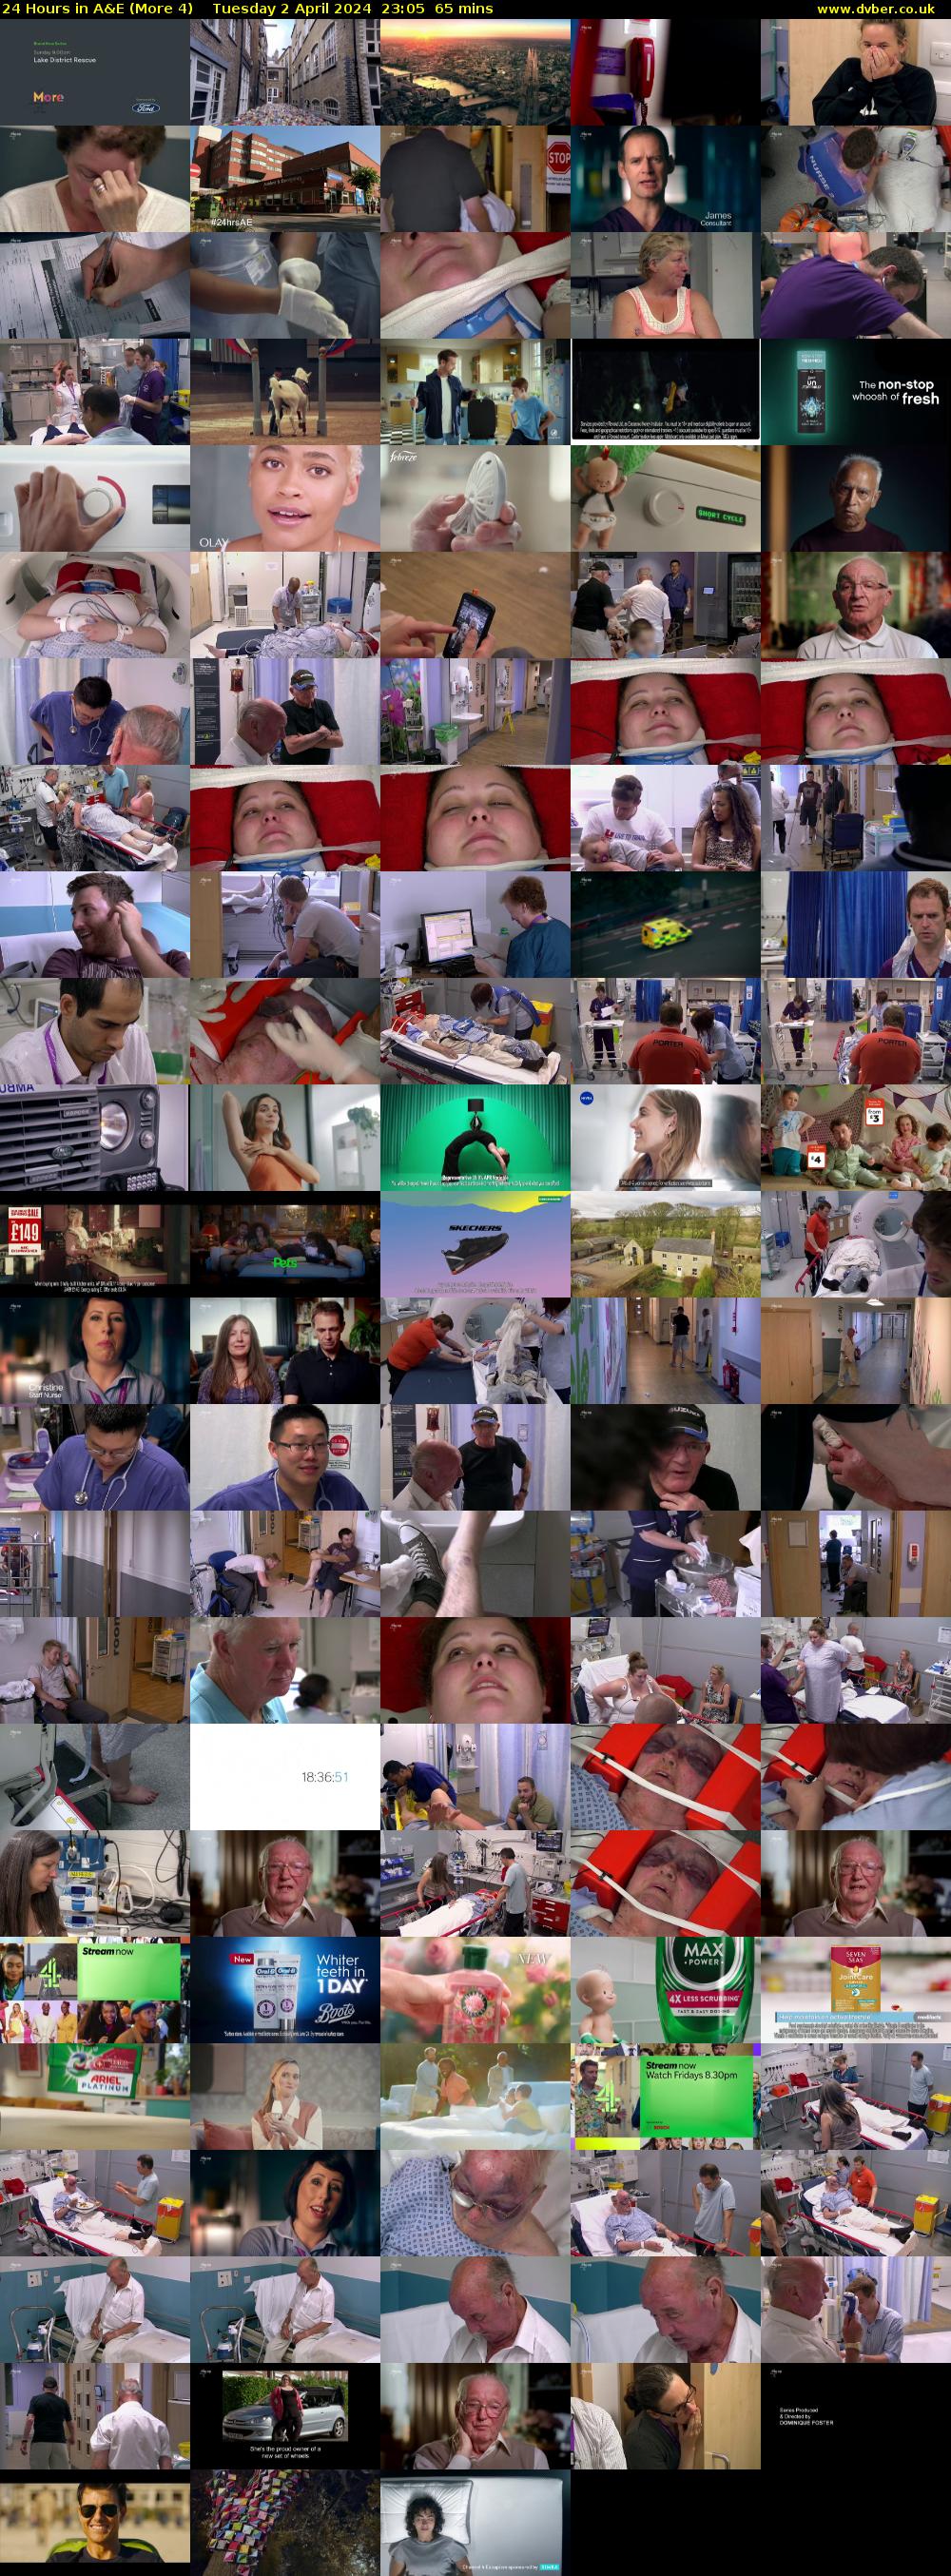 24 Hours in A&E (More 4) Tuesday 2 April 2024 23:05 - 00:10